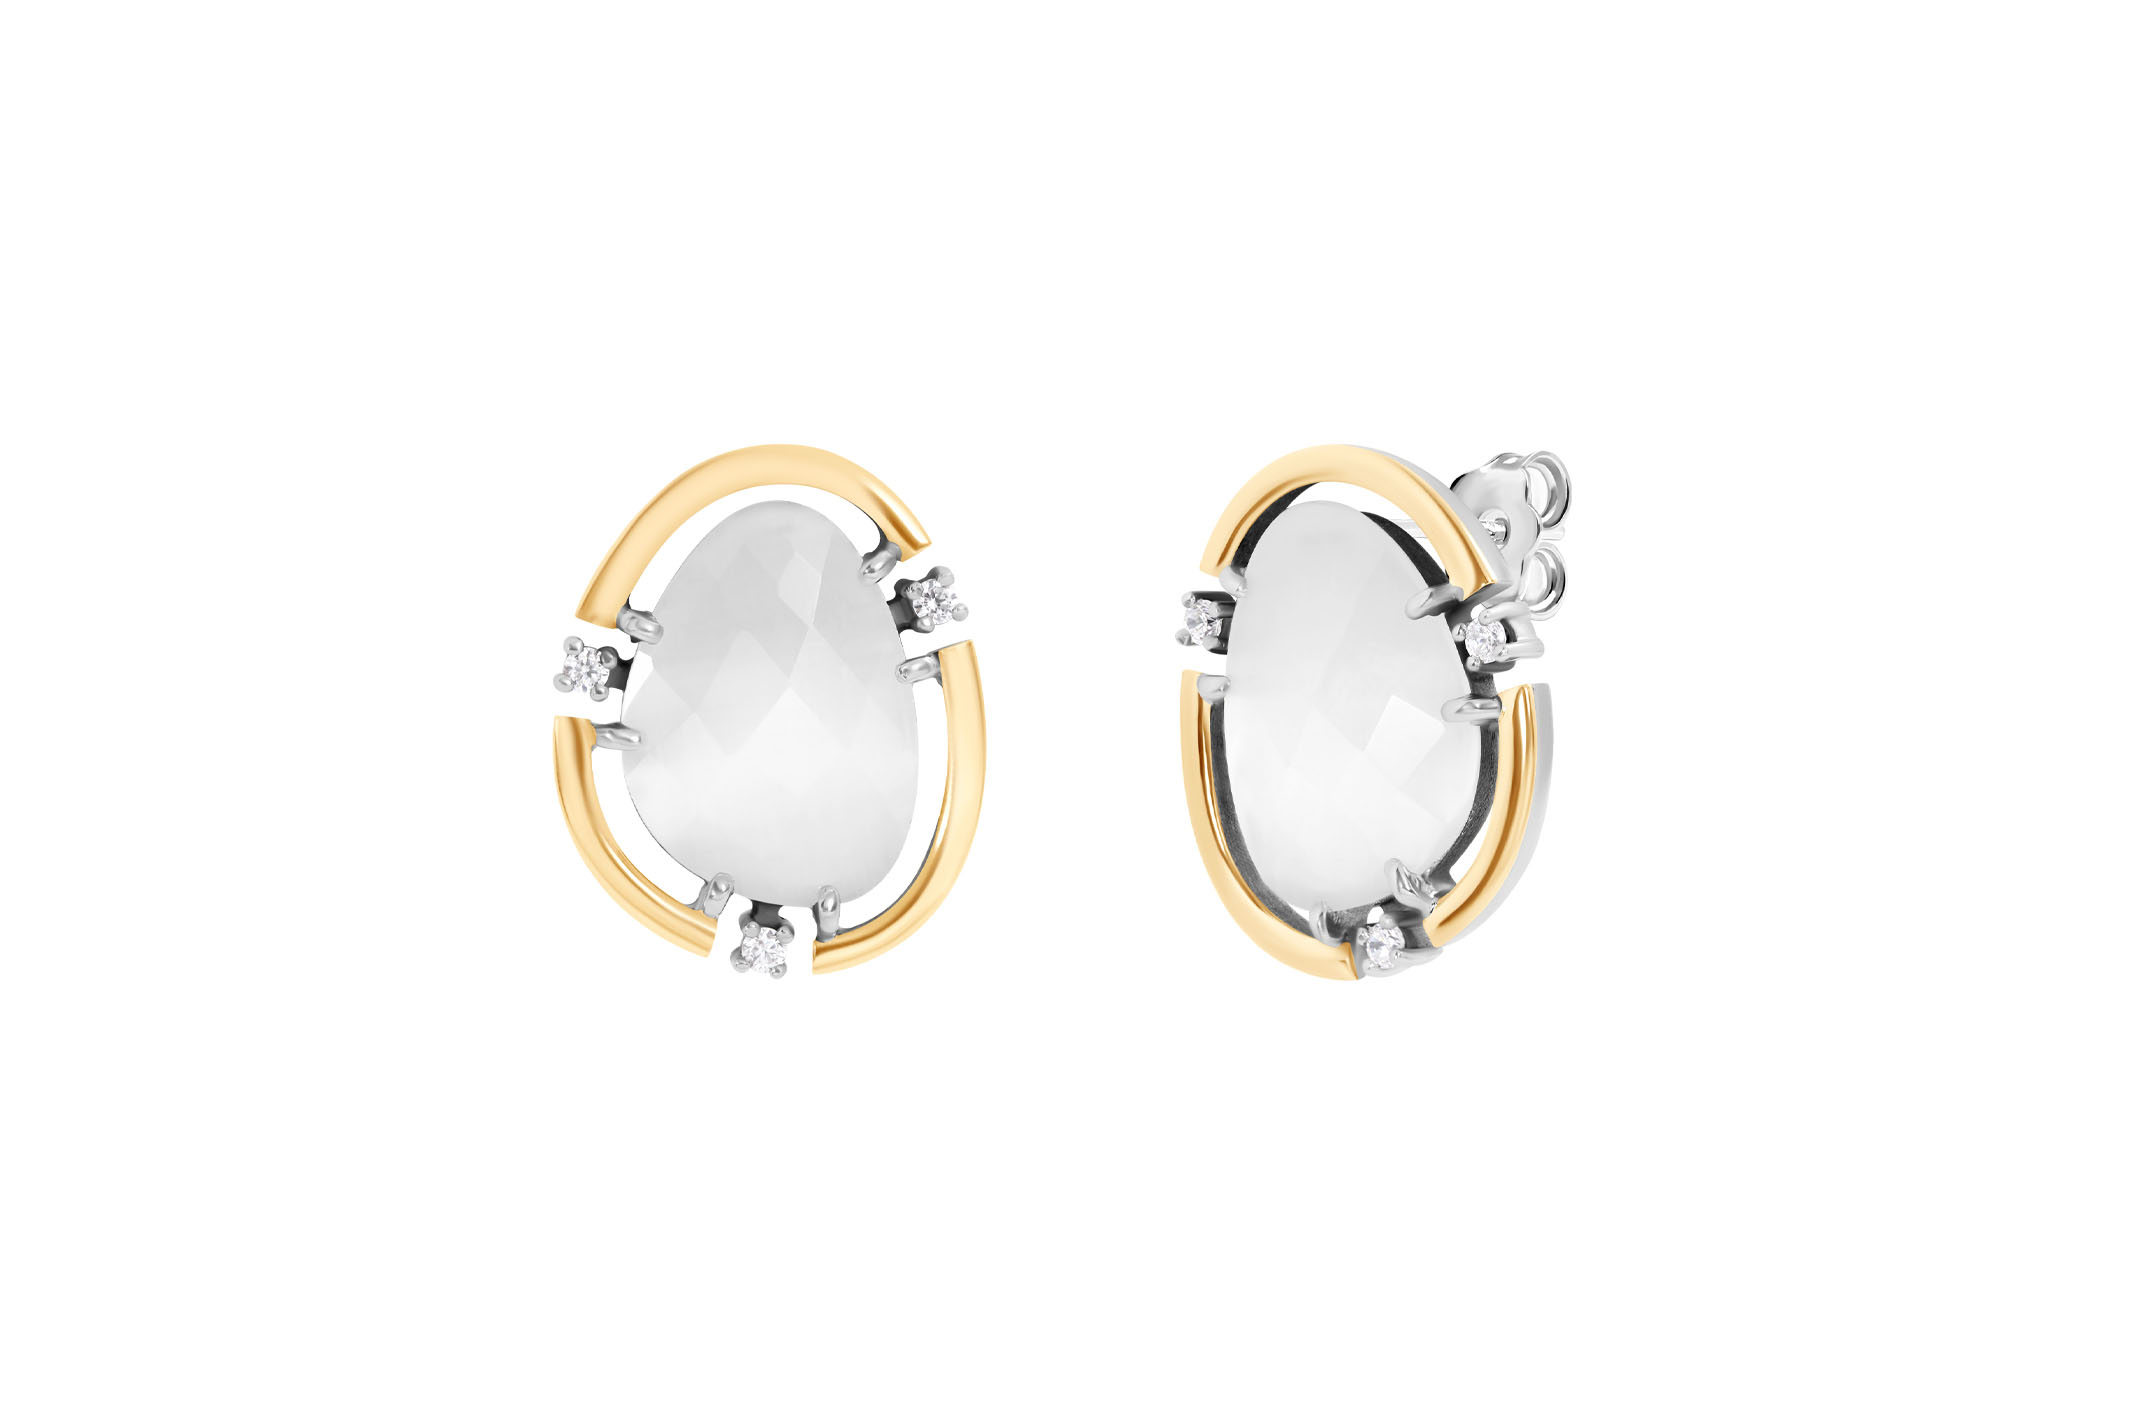 Jewel: earrings;Material: 925 silver and 9K gold;Stones: zirconias & pedra-da-lua;Weight: 7 gr (silver) and 1.7 gr (gold);Color: white and yellow;Size: 2.3 cm x 1.9 cm